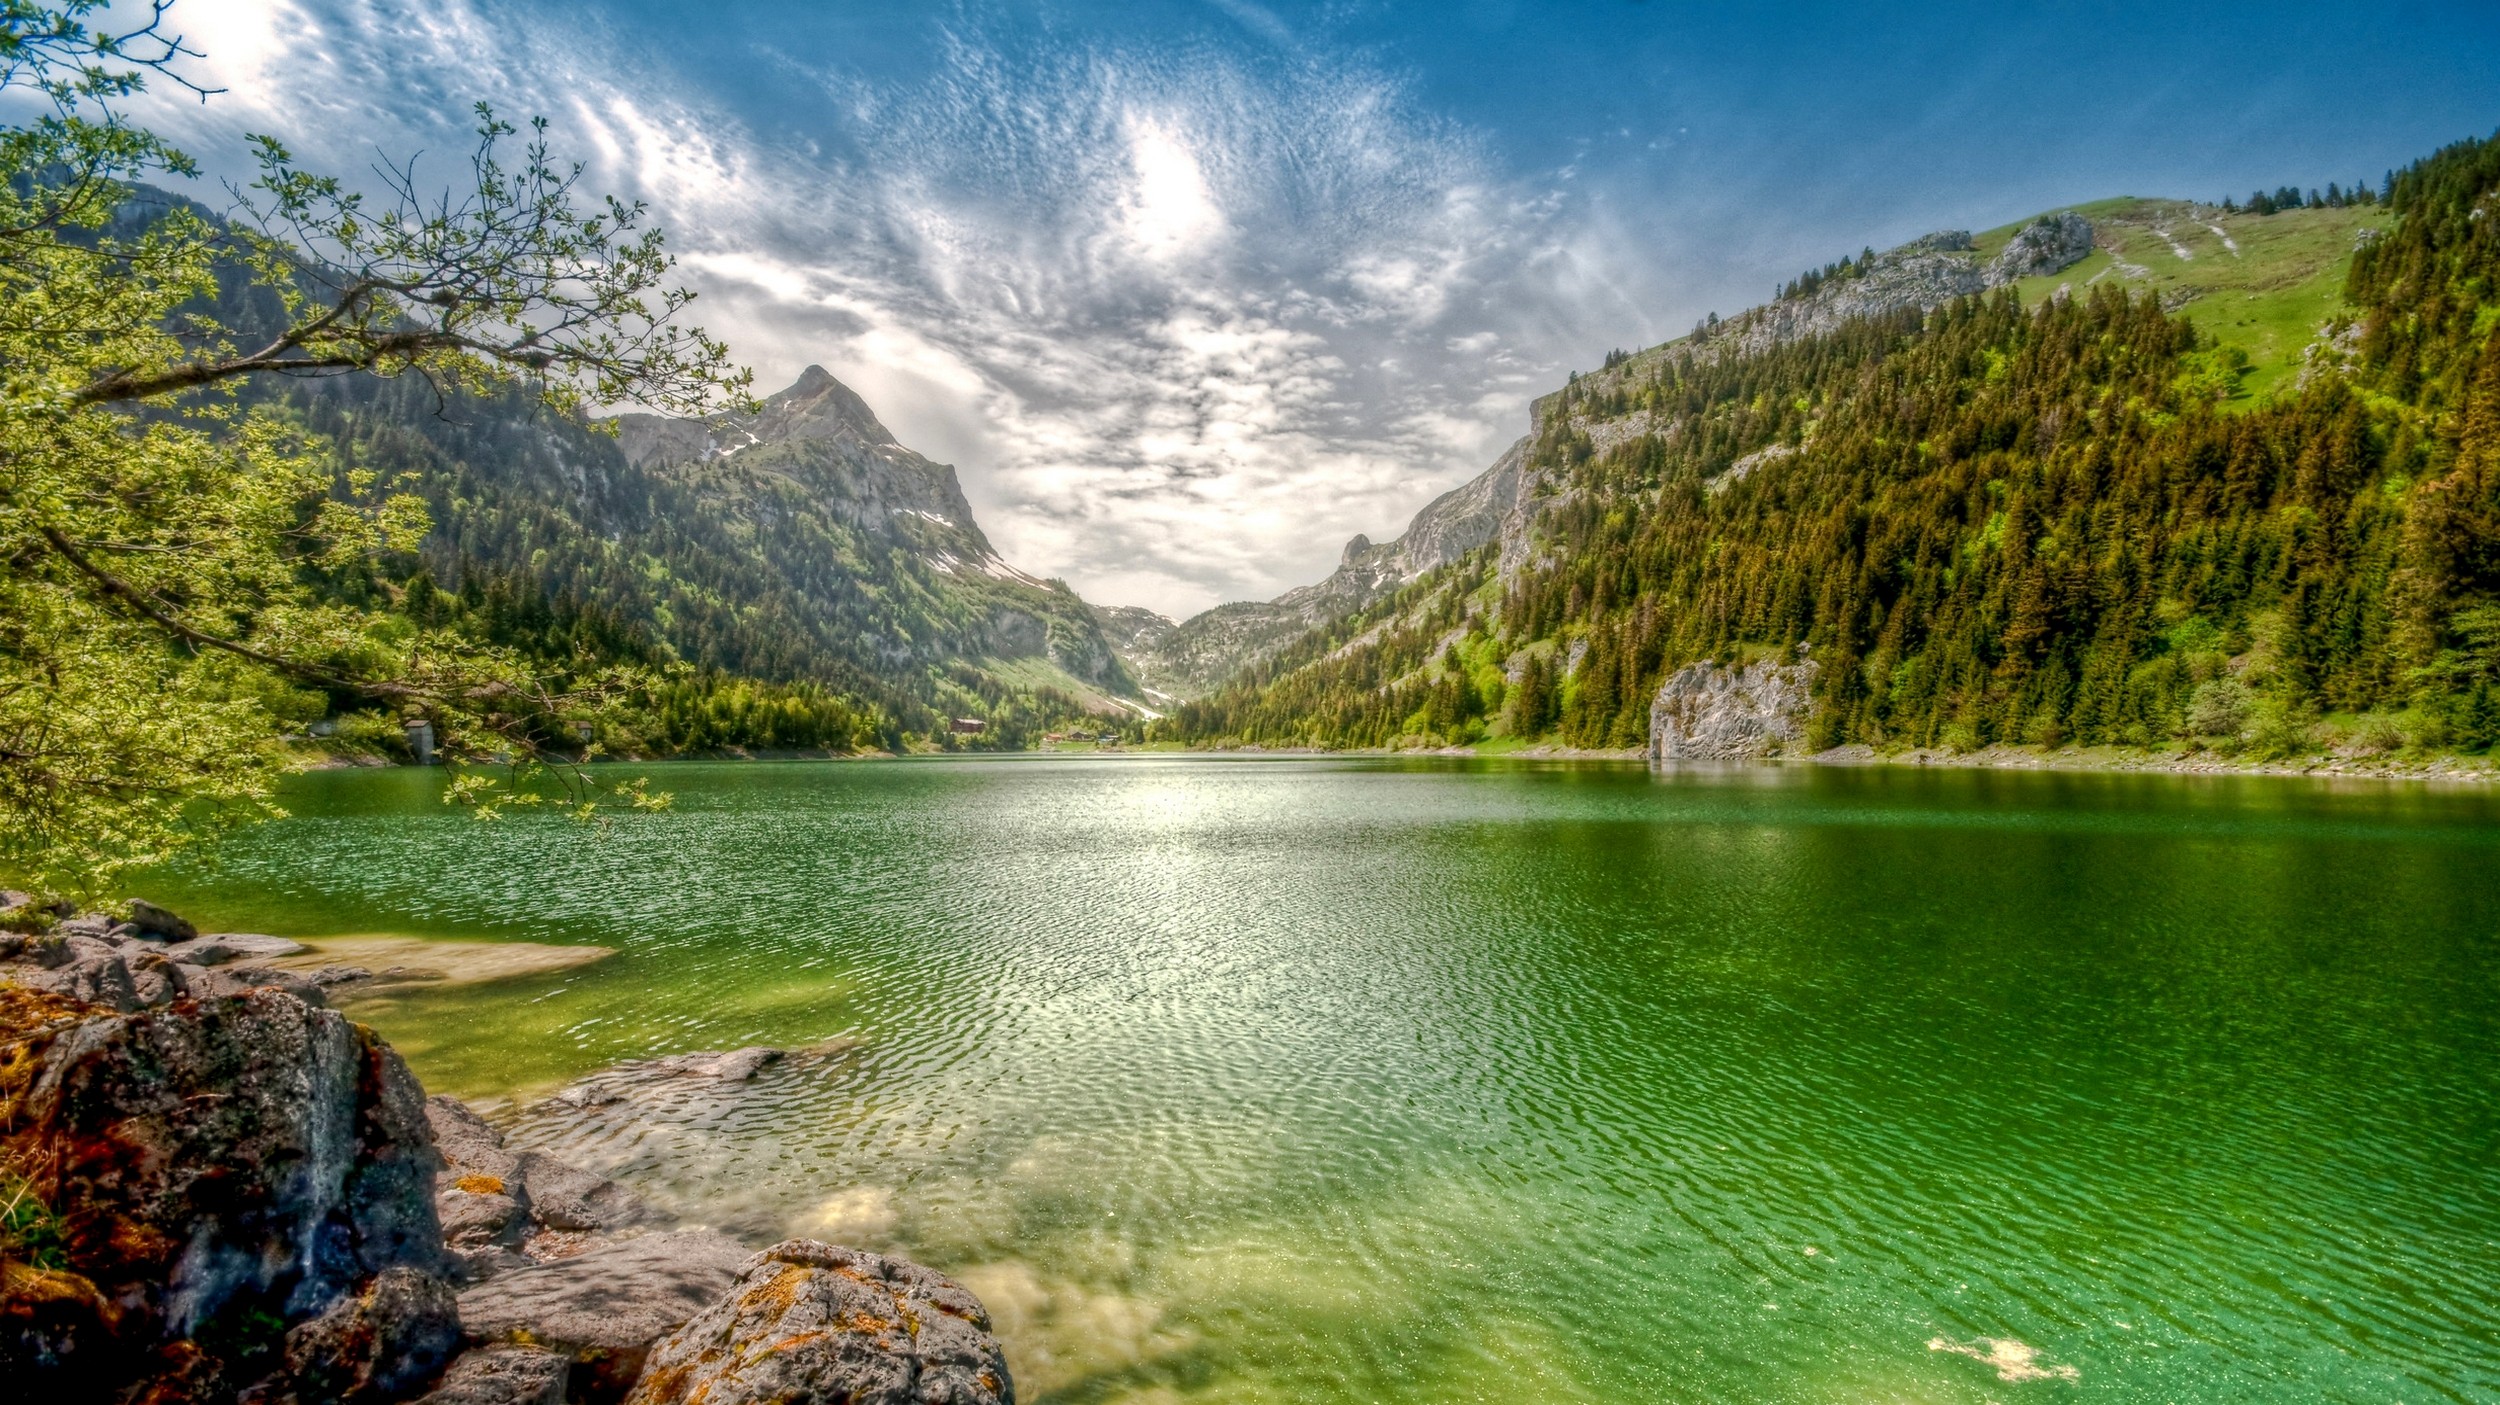 Nature Landscape Lake Mountains Forest Clouds Summer Emerald Water Switzerland 2500x1405